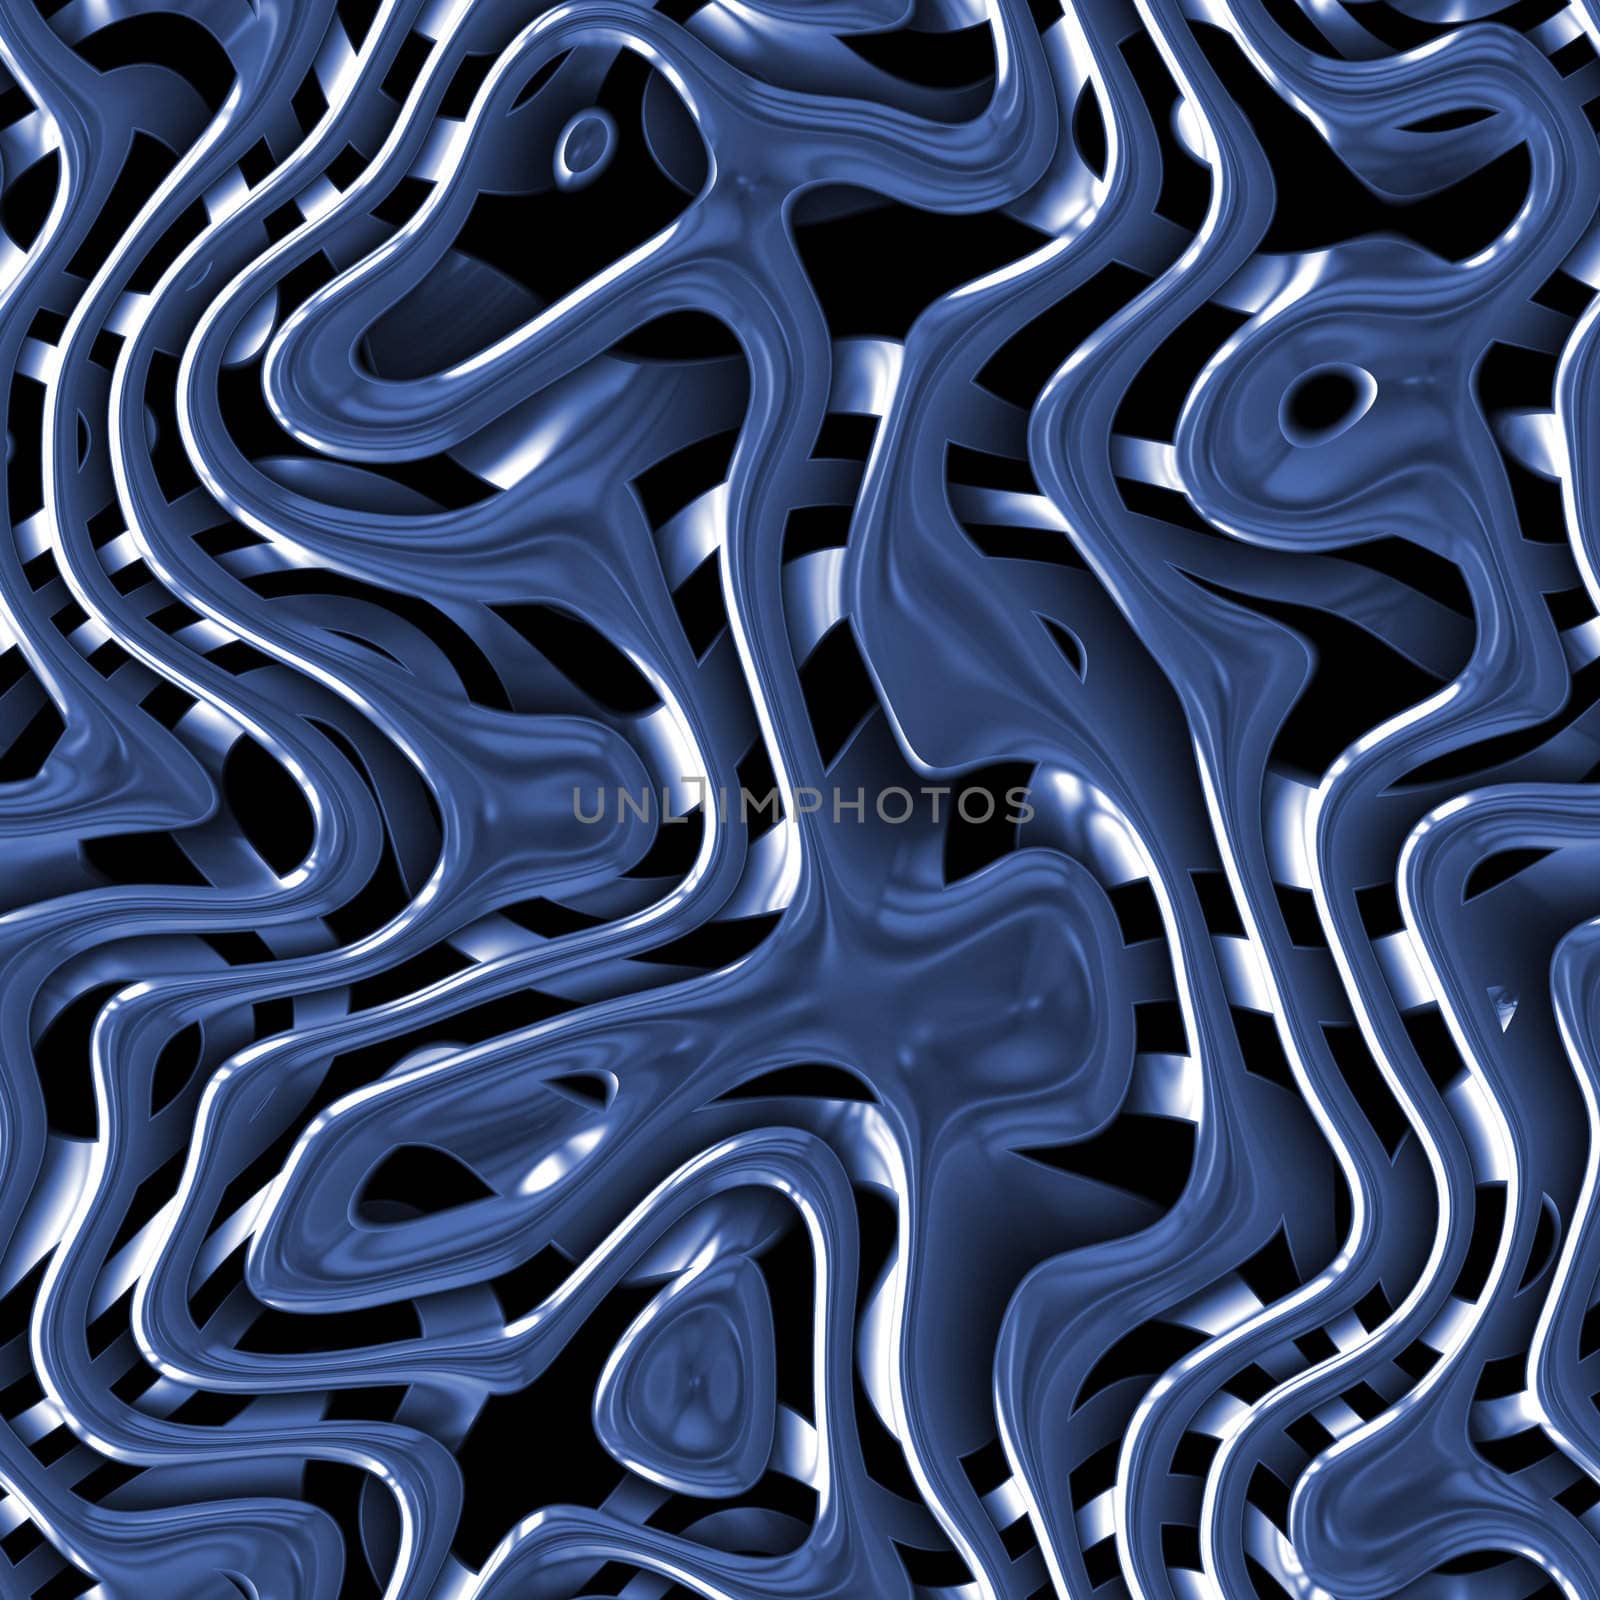 A blue swirly chrome background - very 3d.  This tiles seamlessly as a pattern.